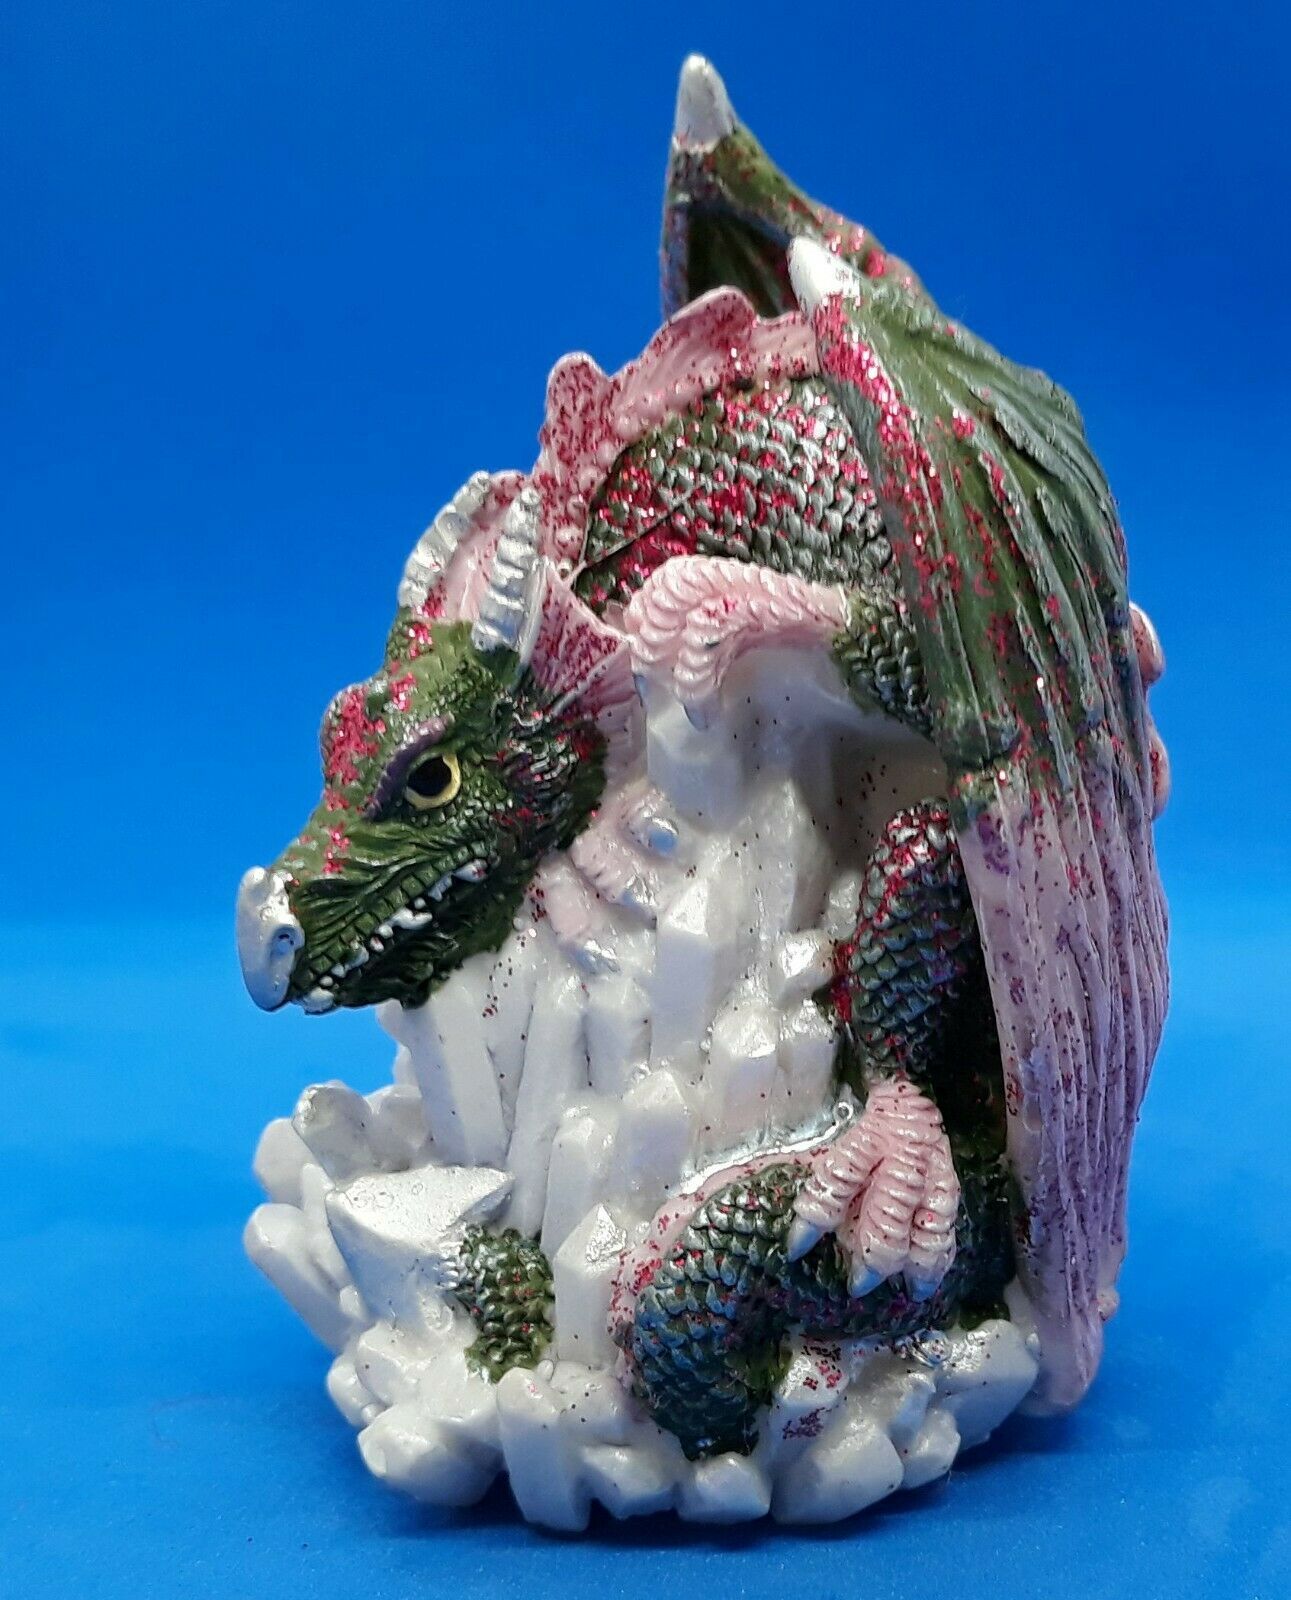 Dragon Perched on Crystals Resin Figurine and 11 similar items